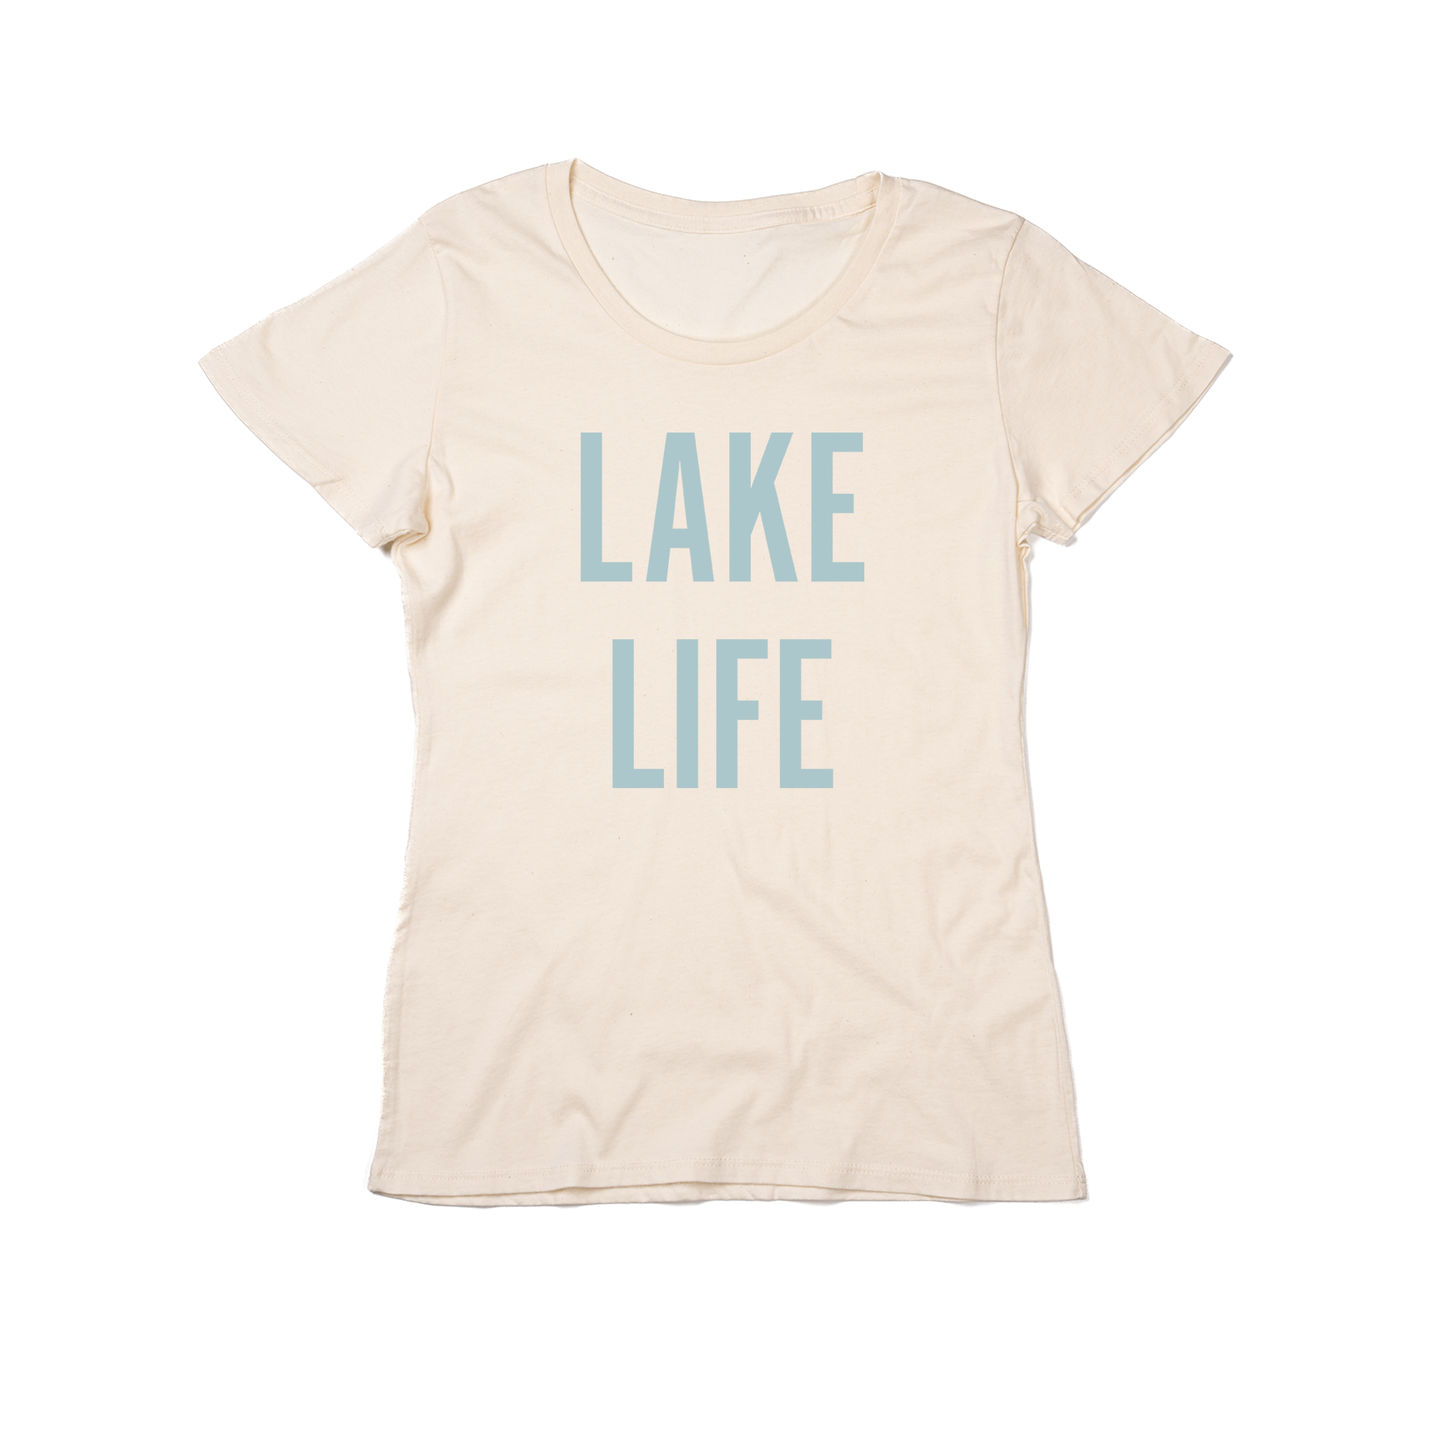 Lake Life (Sky) - Women's Fitted Tee (Natural)